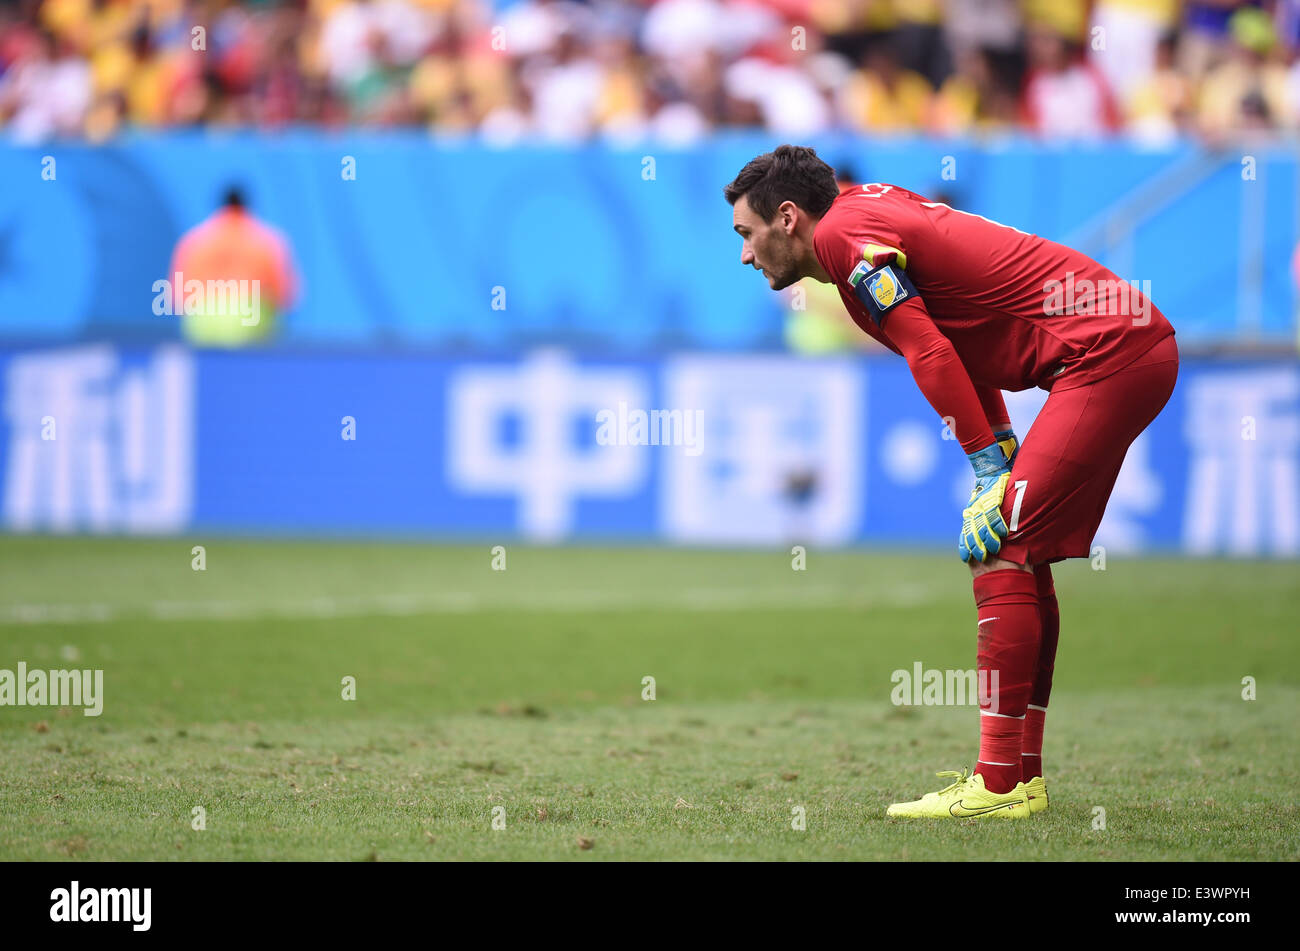 Brasilia, Brazil. 30th June, 2014. Goalkeeper Hugo Lloris of France seen during the FIFA World Cup 2014 round of 16 match between France and Nigeria at the Estadio National Stadium in Brasilia, Brazil, on 30 June 2014. Credit:  dpa picture alliance/Alamy Live News Stock Photo